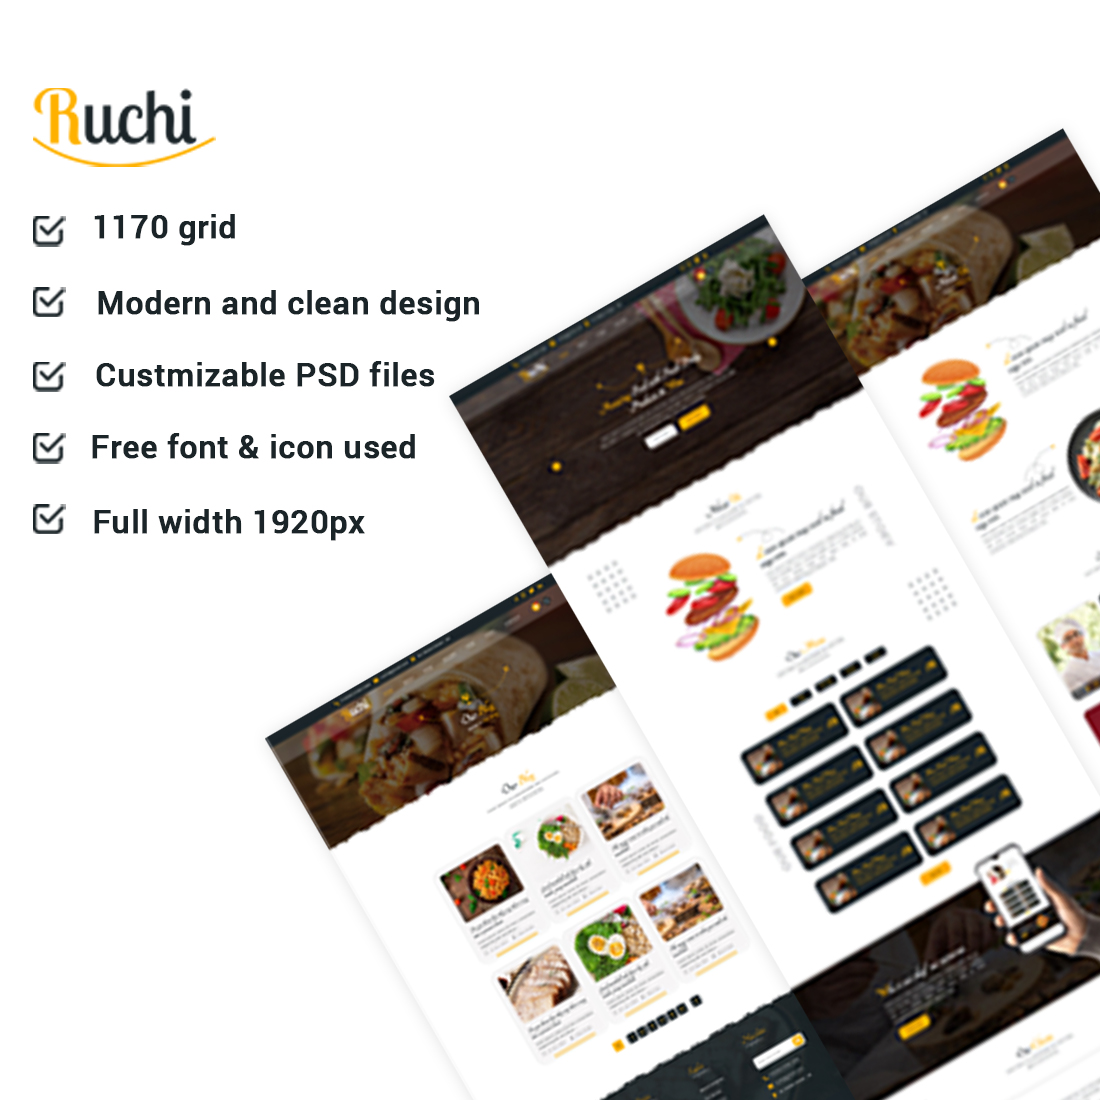 Ruchi PSD Food Website Template cover image.